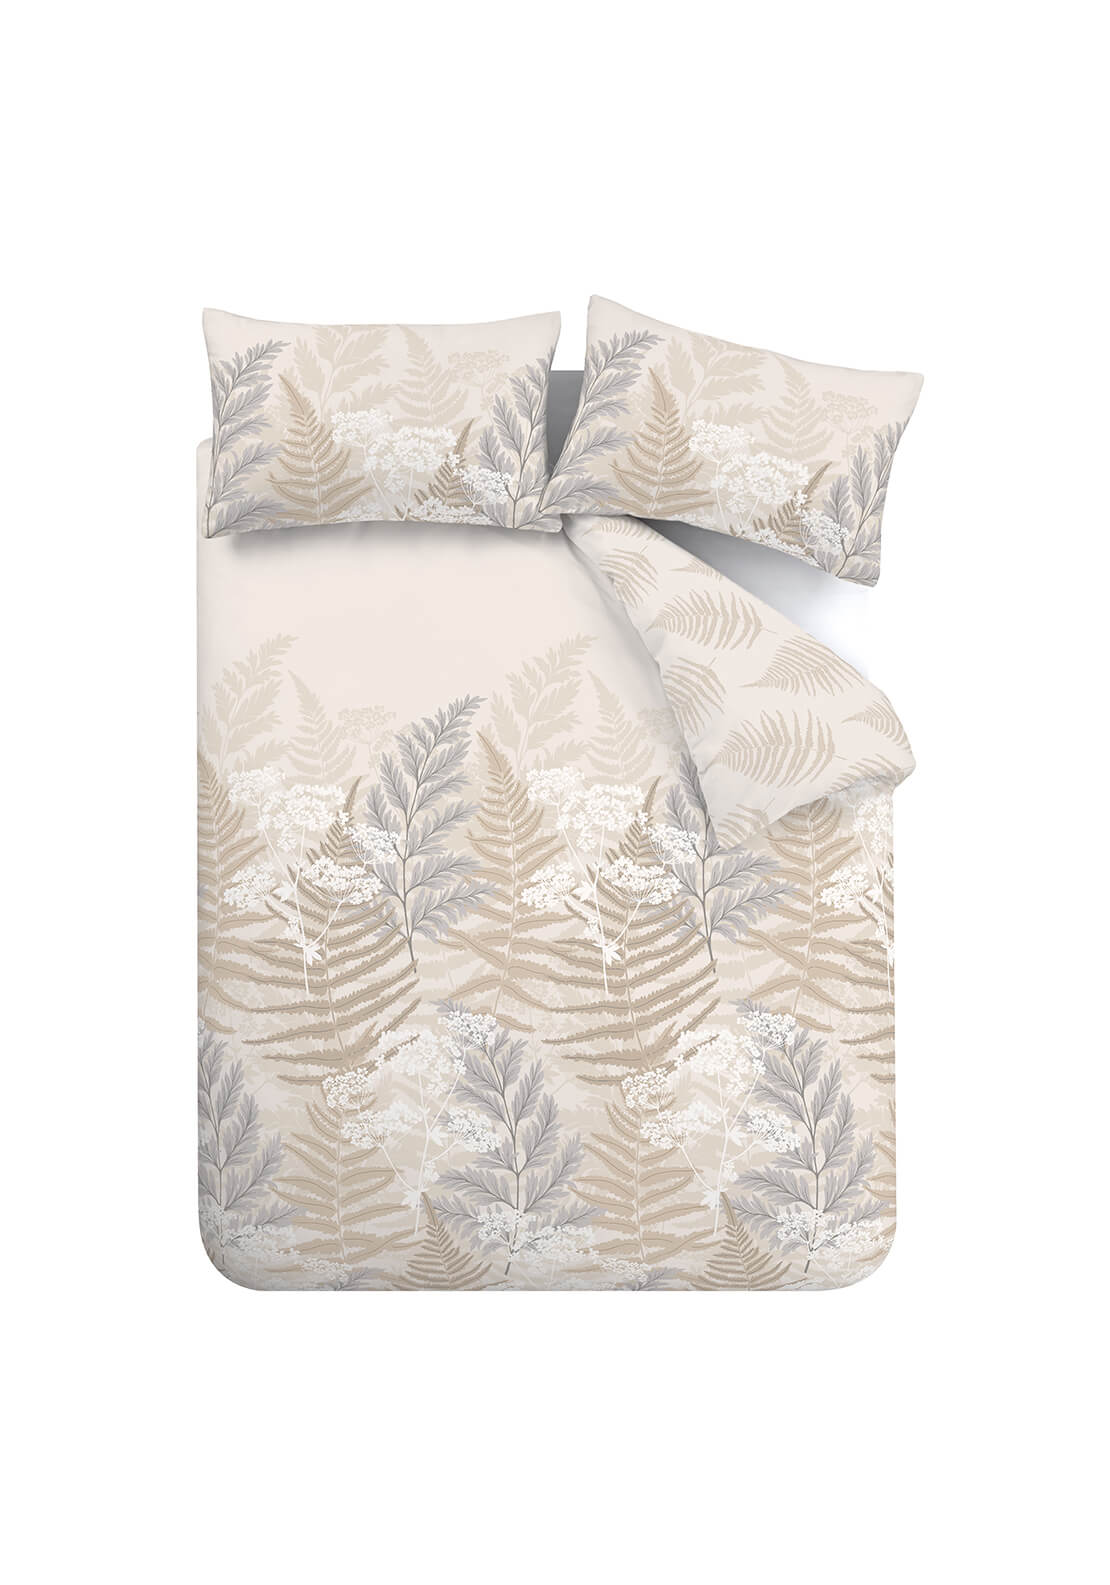  The Home Collection Botanical Fern Floral Reversible Duvet Cover Set - Natural 5 Shaws Department Stores